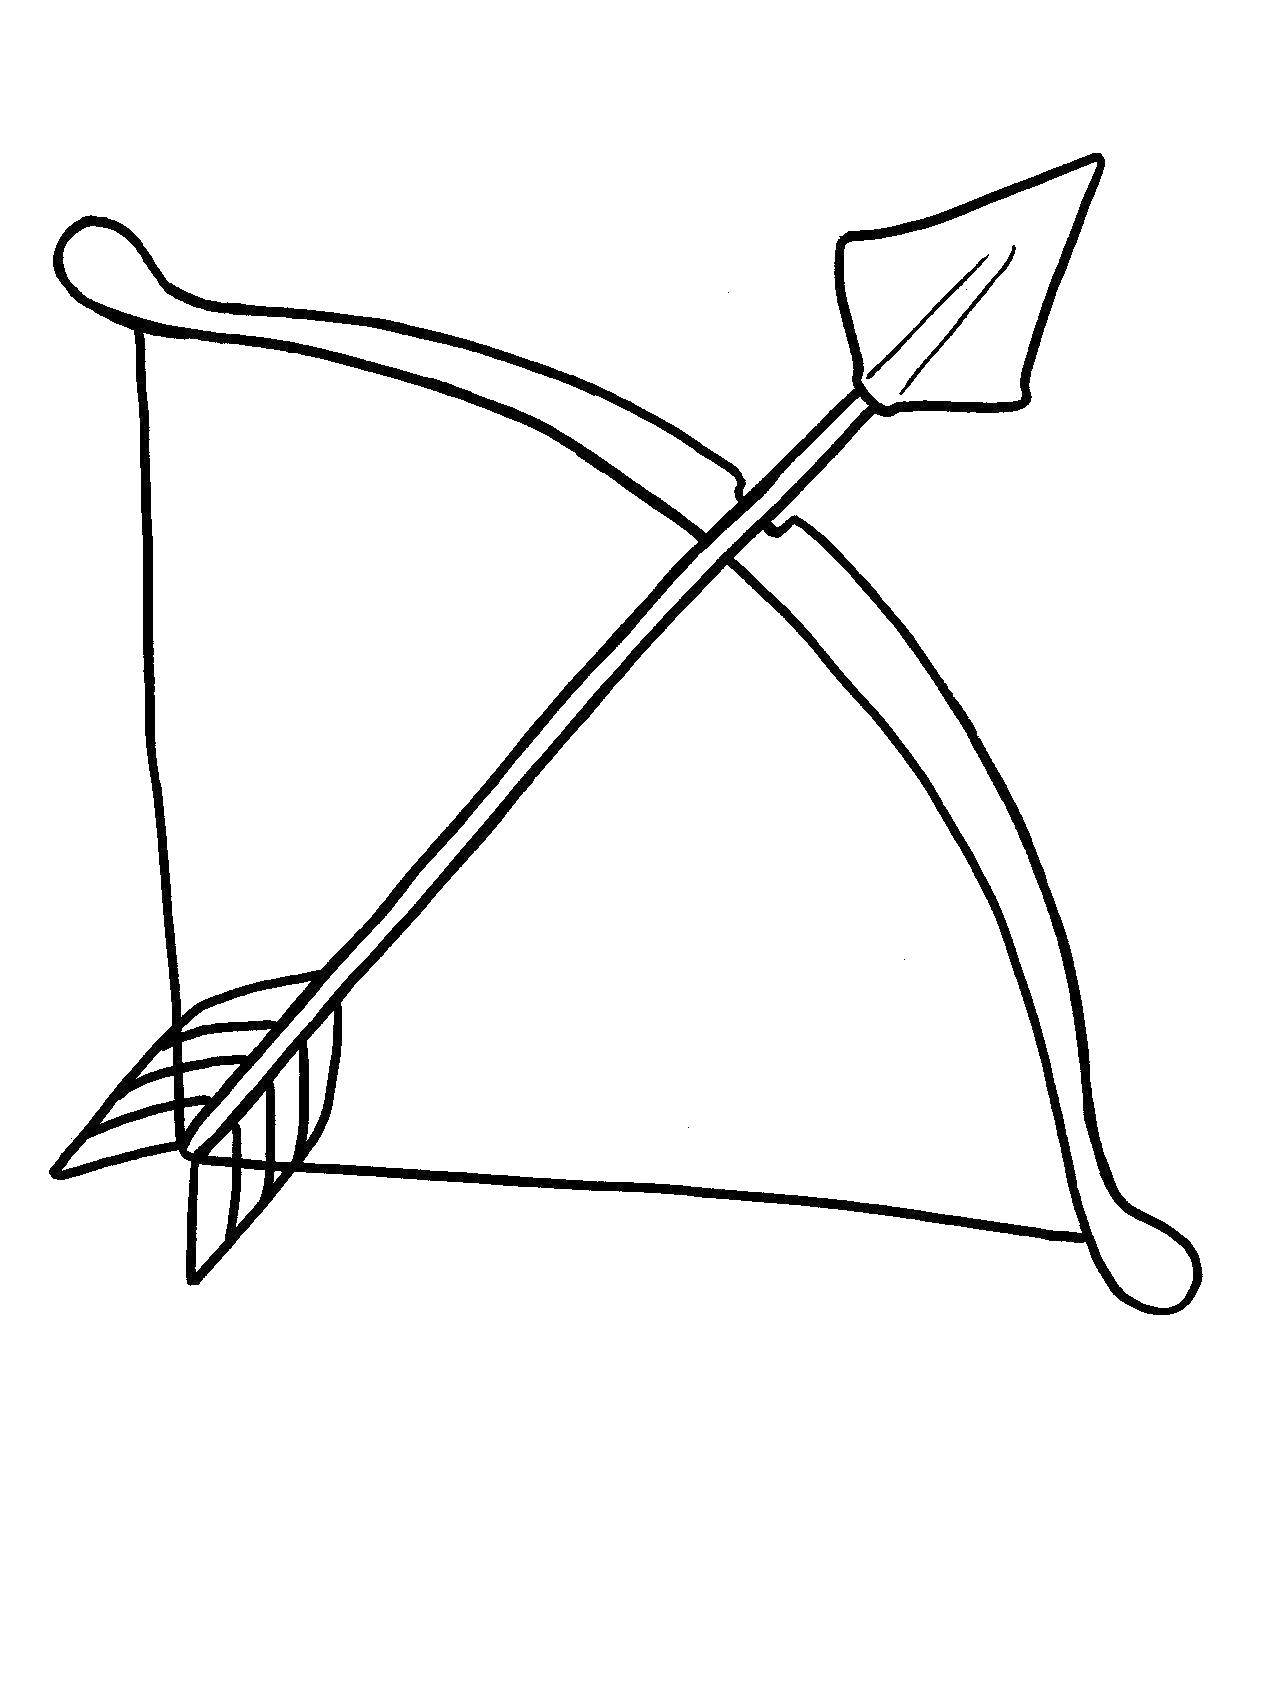 Coloring Bow and arrow. Category weapons. Tags:  bow, arrow.